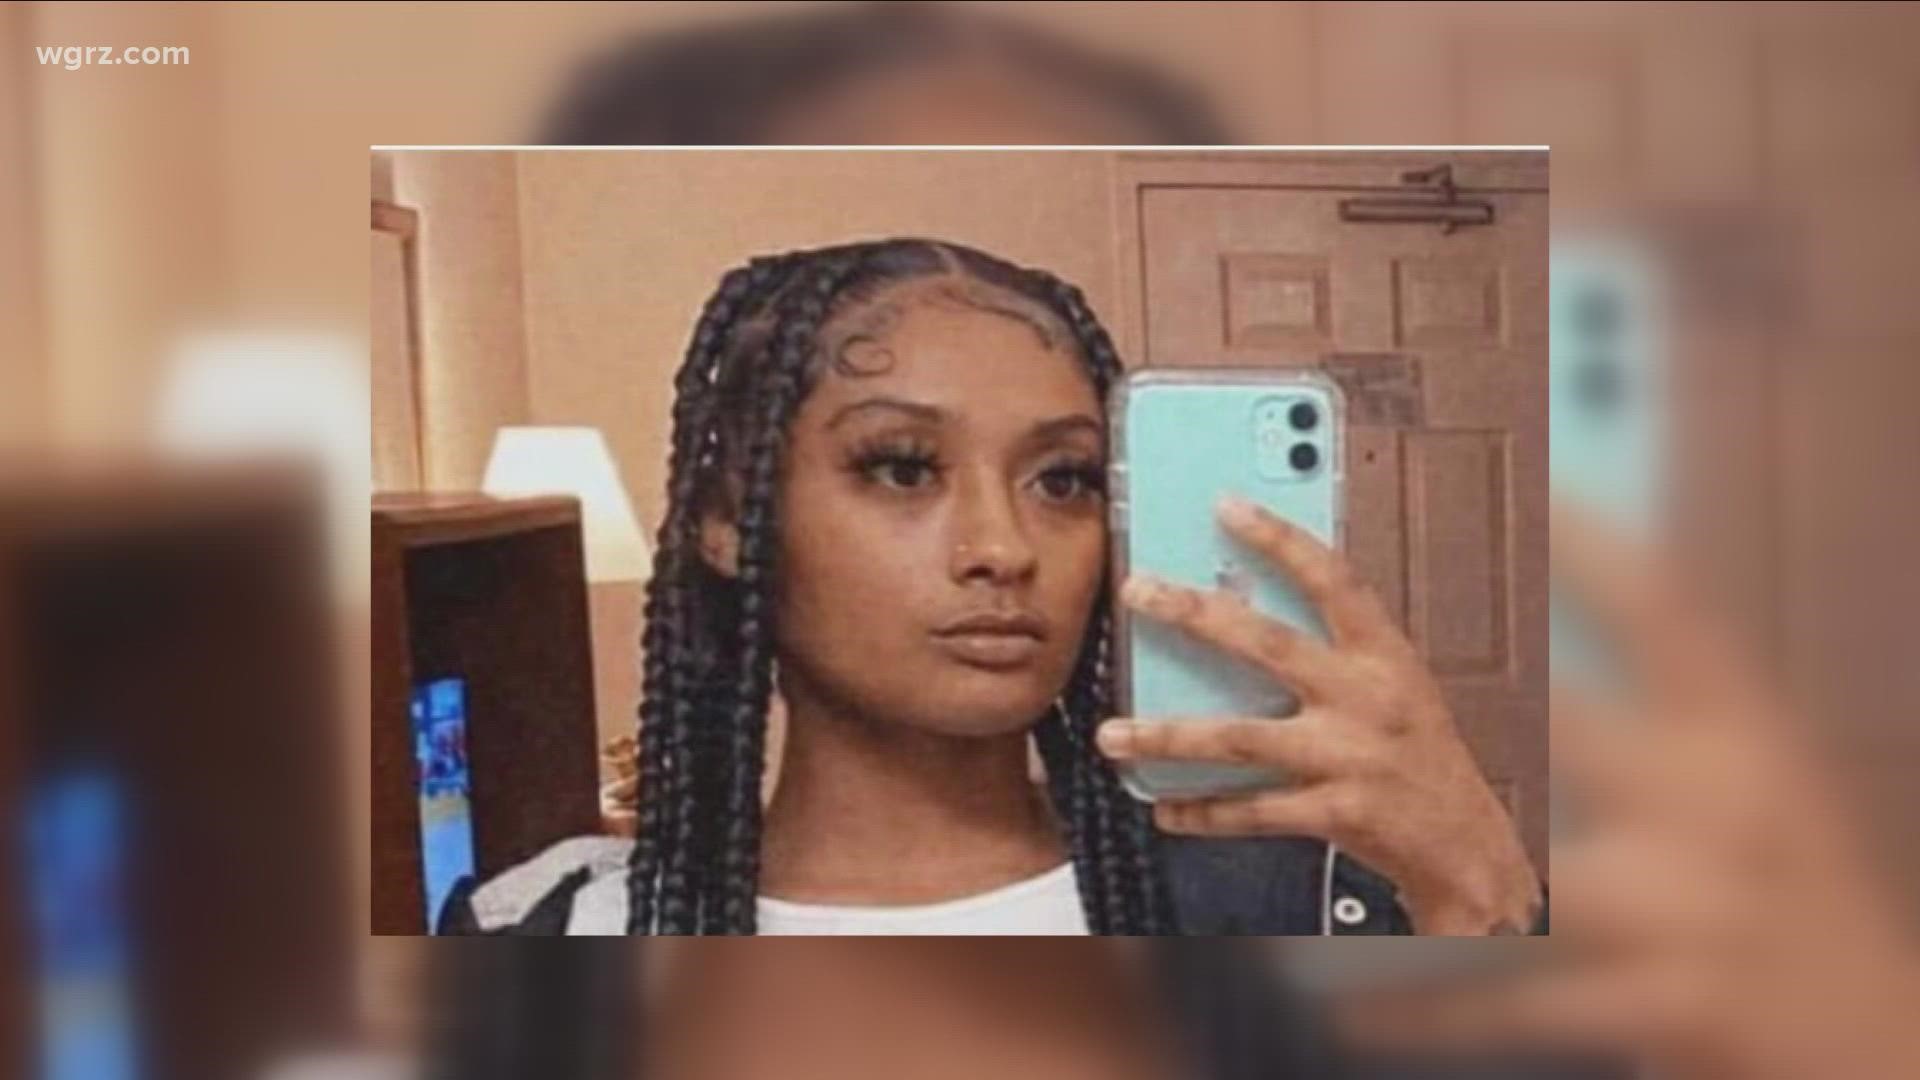 Jalia Marrero was last seen on May 8th or 9th in the city of Buffalo.